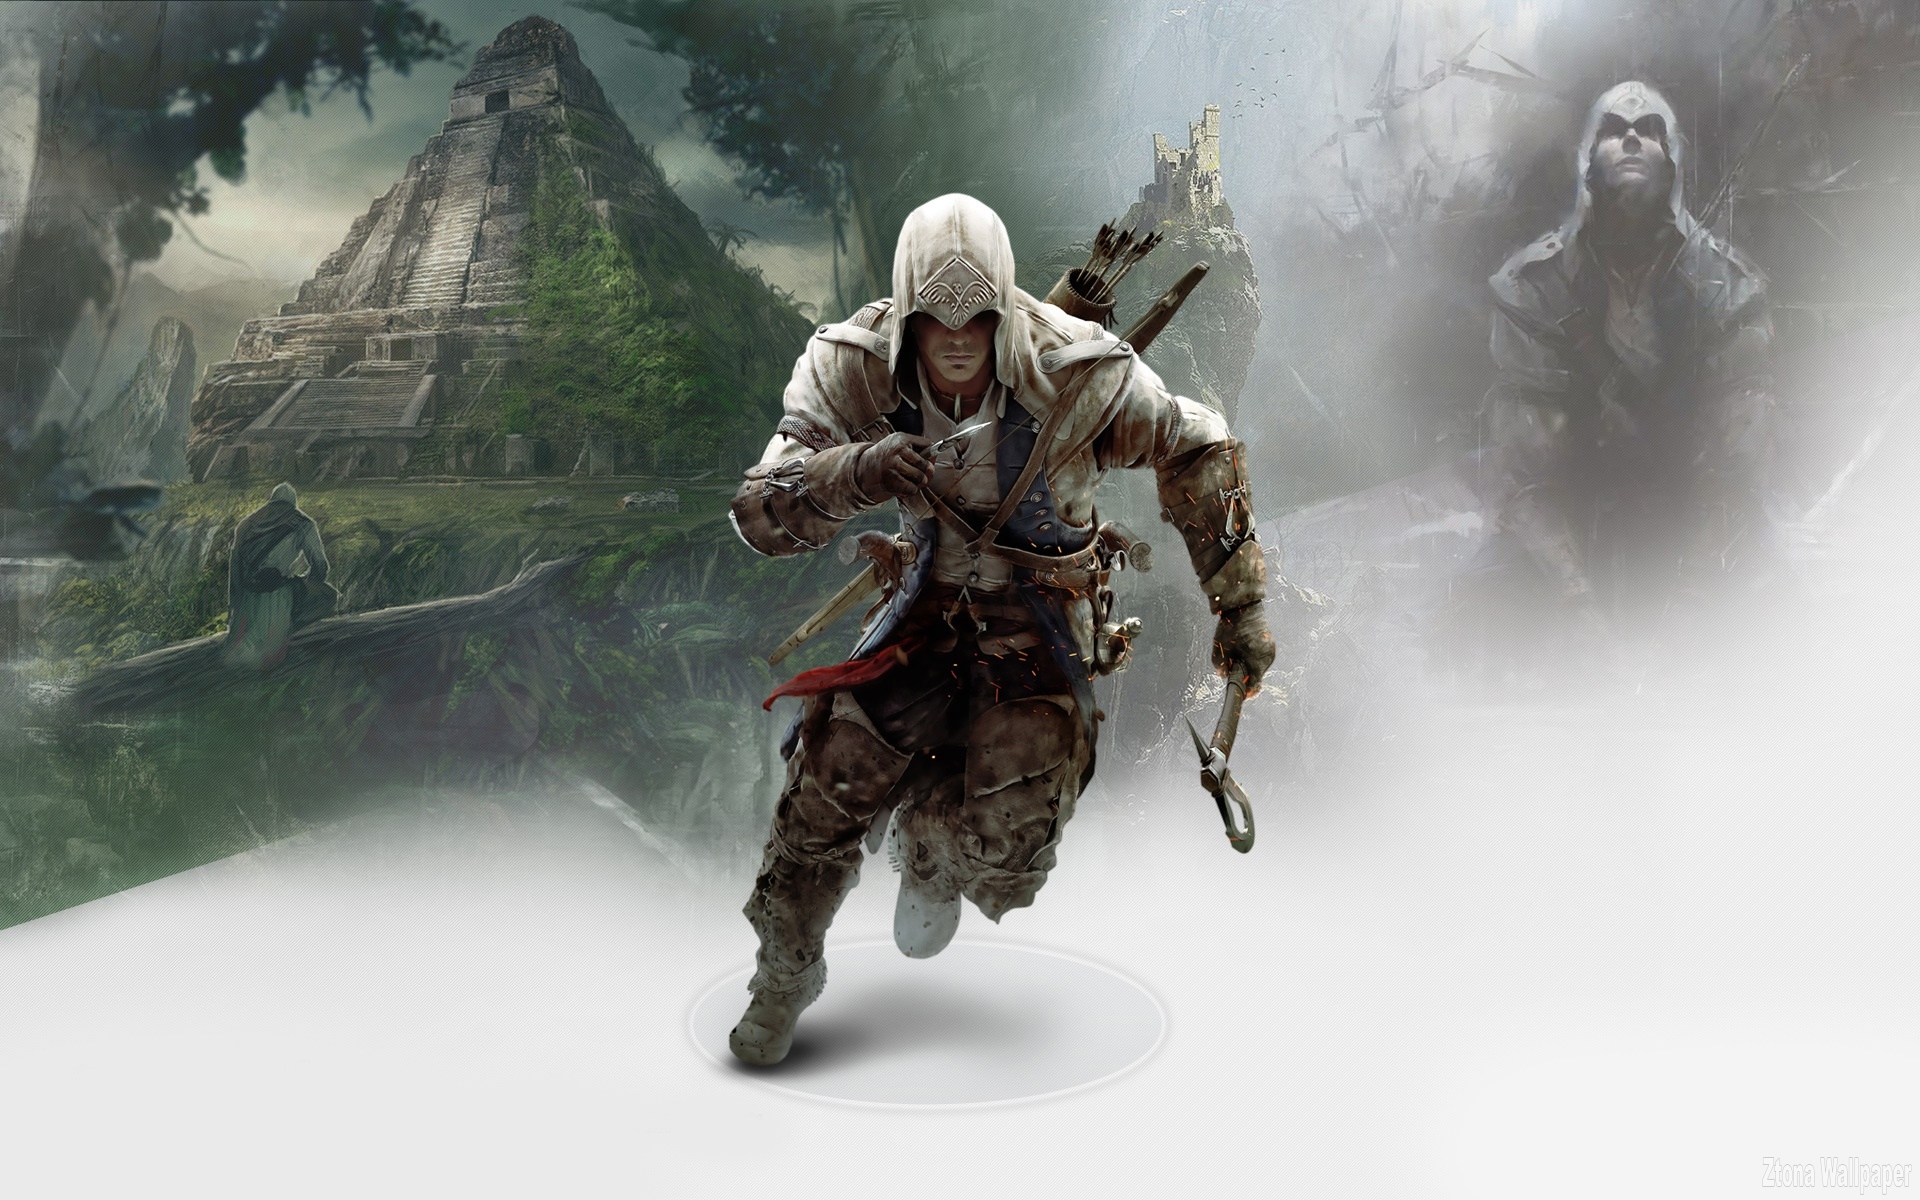 connor in assassins creed 3 - Ztona Wallpapers